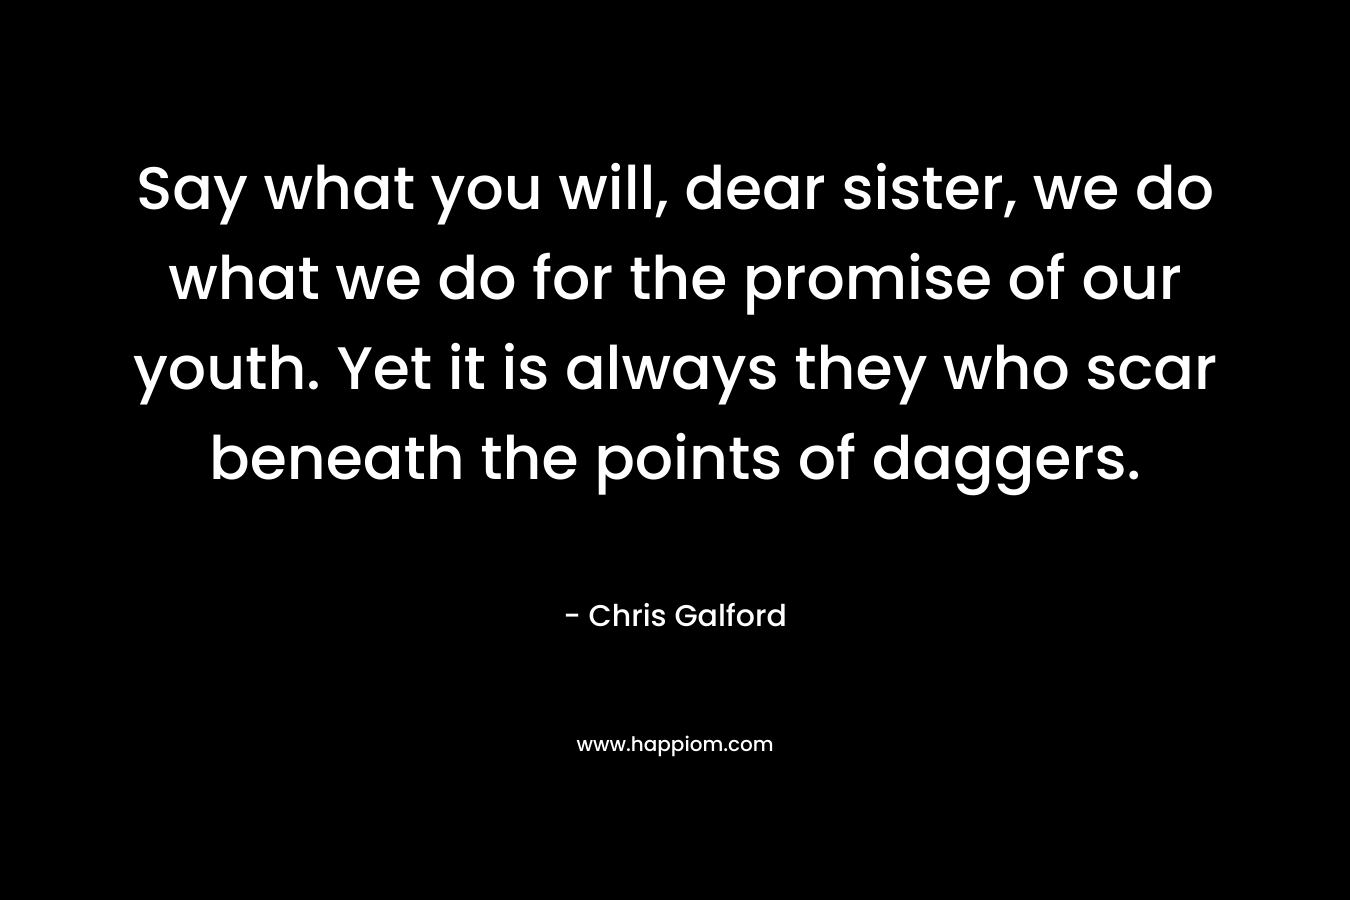 Say what you will, dear sister, we do what we do for the promise of our youth. Yet it is always they who scar beneath the points of daggers. – Chris Galford